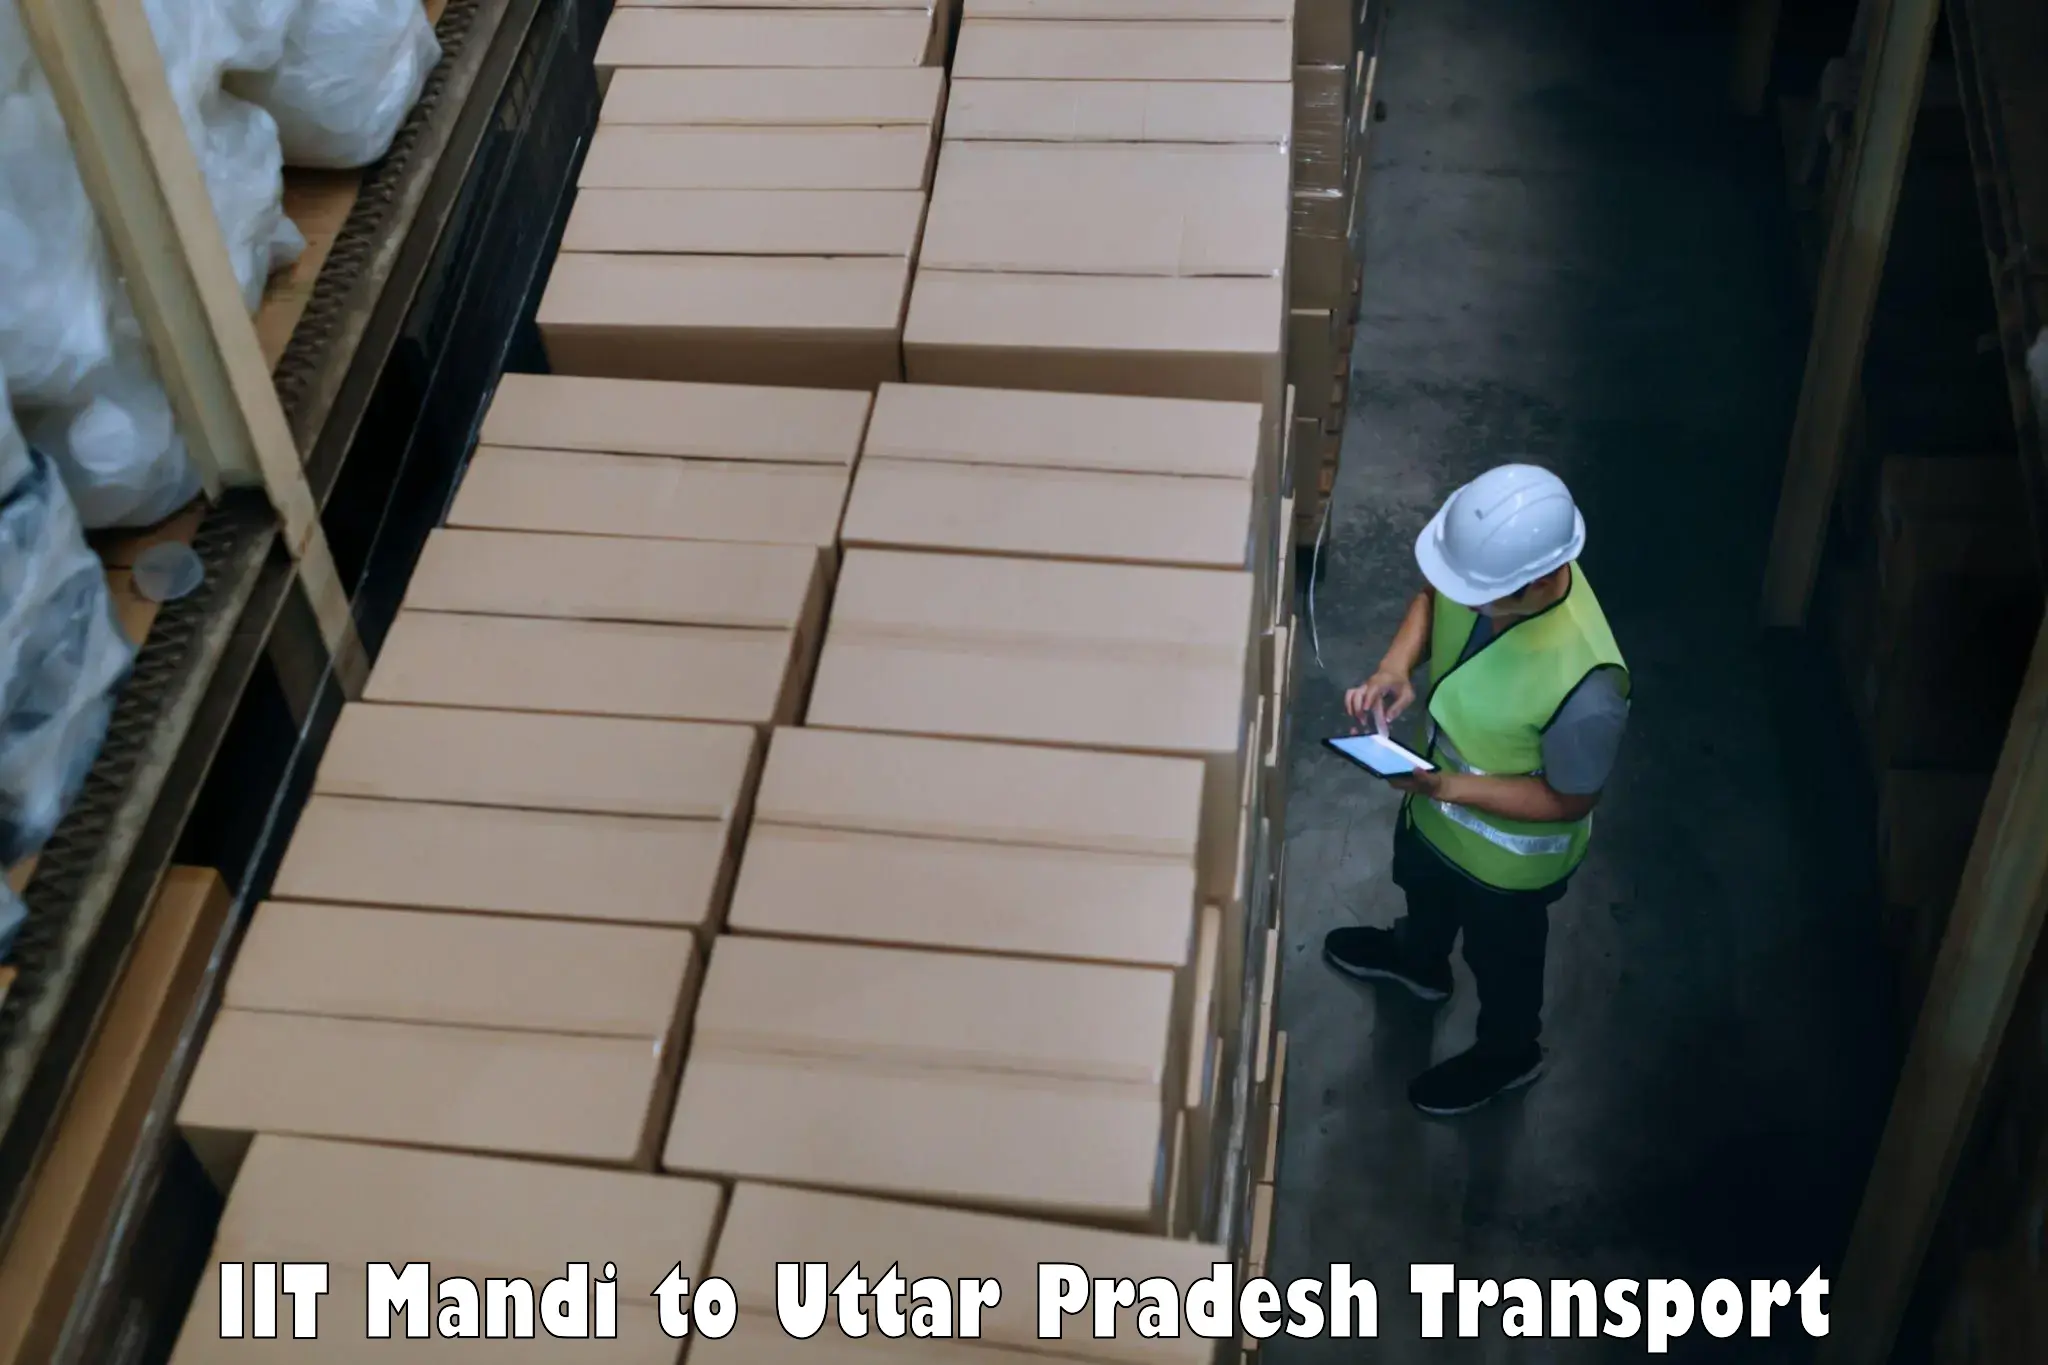 Commercial transport service IIT Mandi to Lalitpur